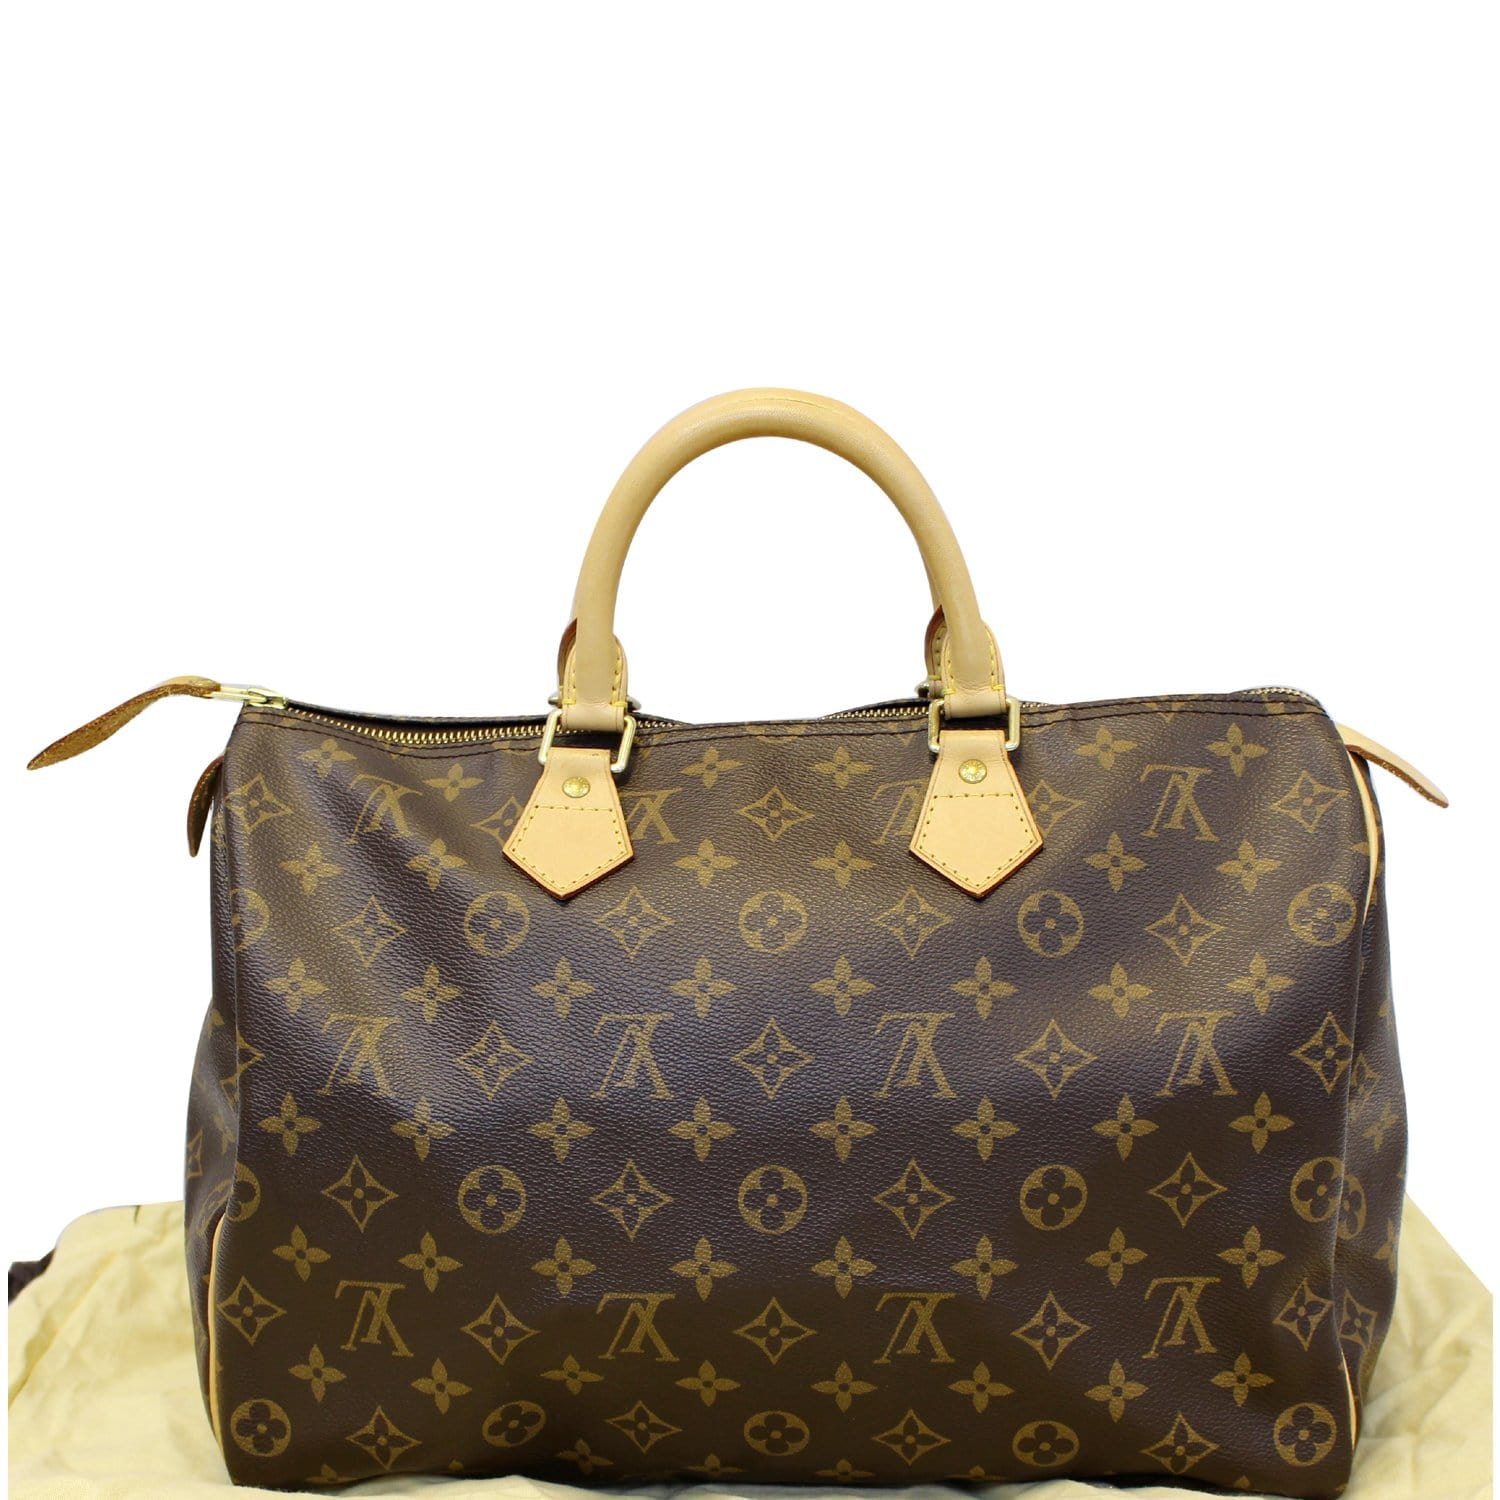 Shop for Louis Vuitton Blue Epi Leather Speedy 35 cm Bag - Shipped from USA